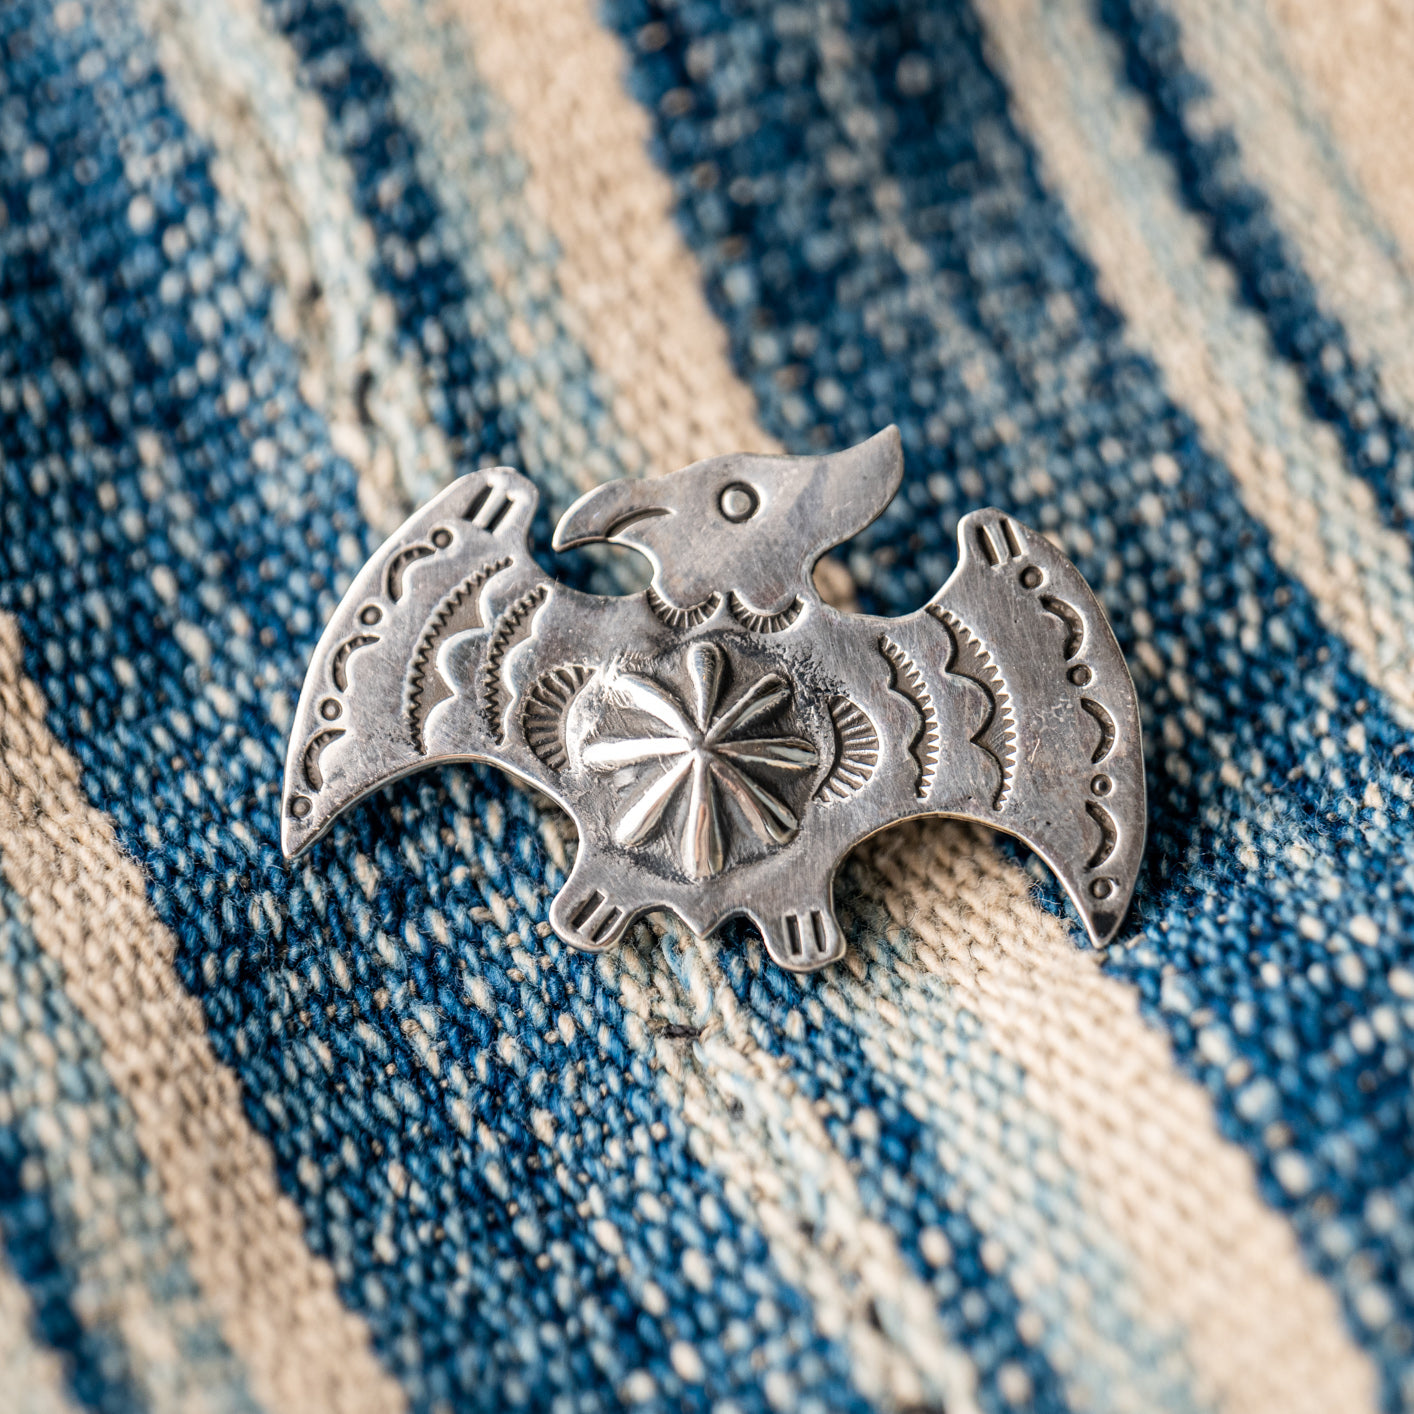 Munqa PEACE Newtive Badge - 925 Sterling Silver